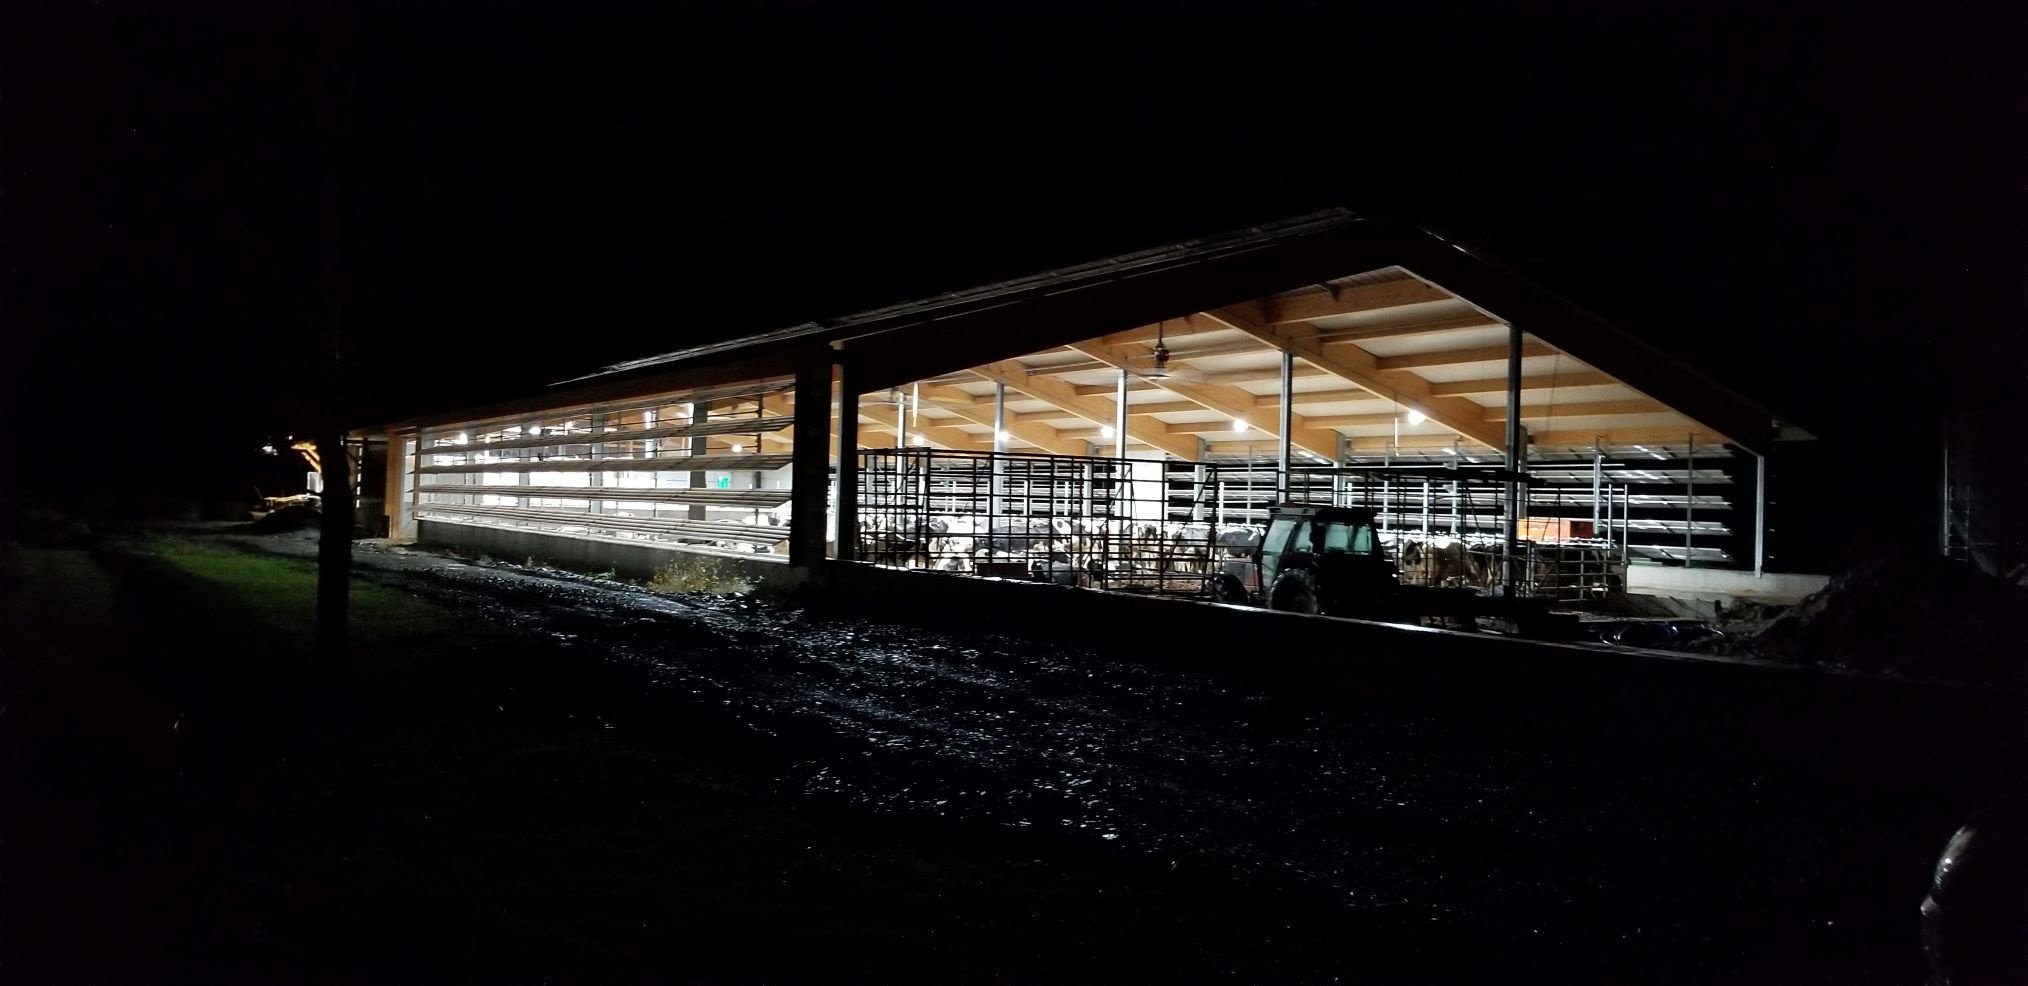 2019 Clarenceville, Quebec - Dairy barn